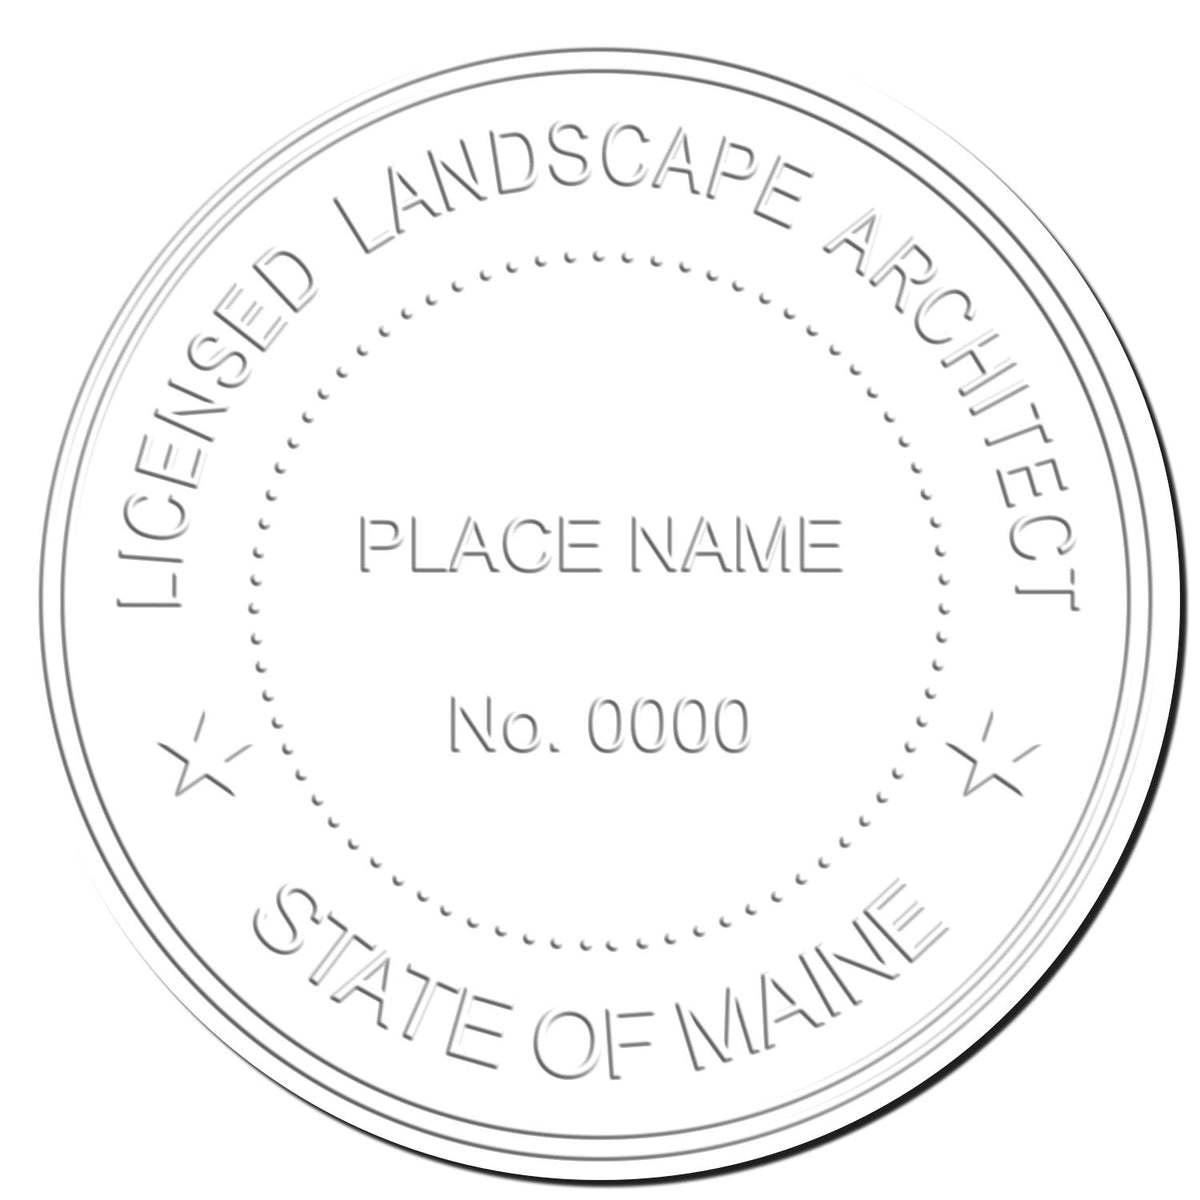 This paper is stamped with a sample imprint of the Hybrid Maine Landscape Architect Seal, signifying its quality and reliability.